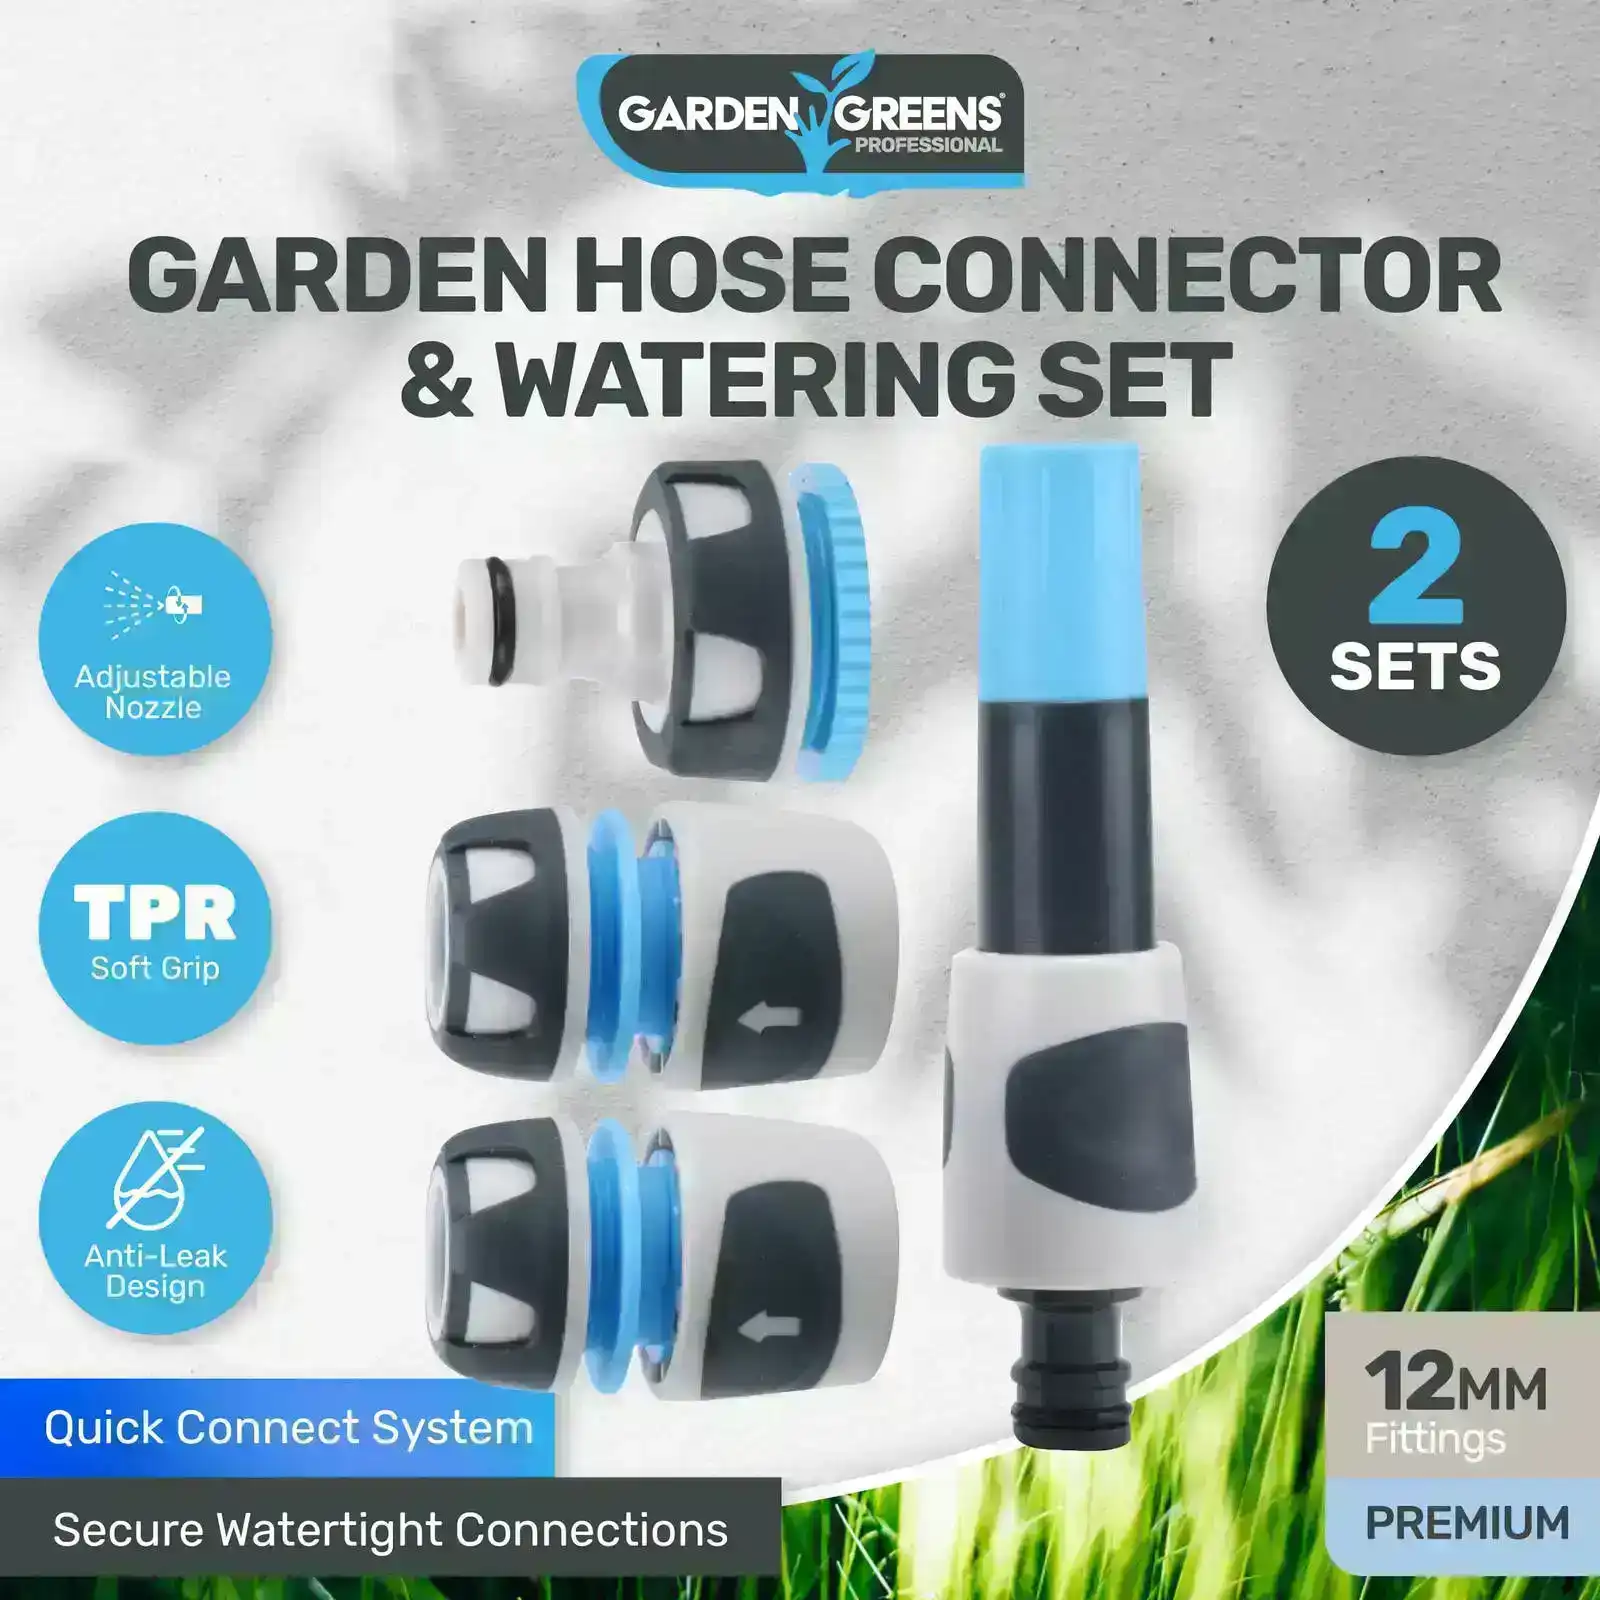 Garden Greens® 2 Sets Hose Connector & Watering Sets Premium Quality 12mm